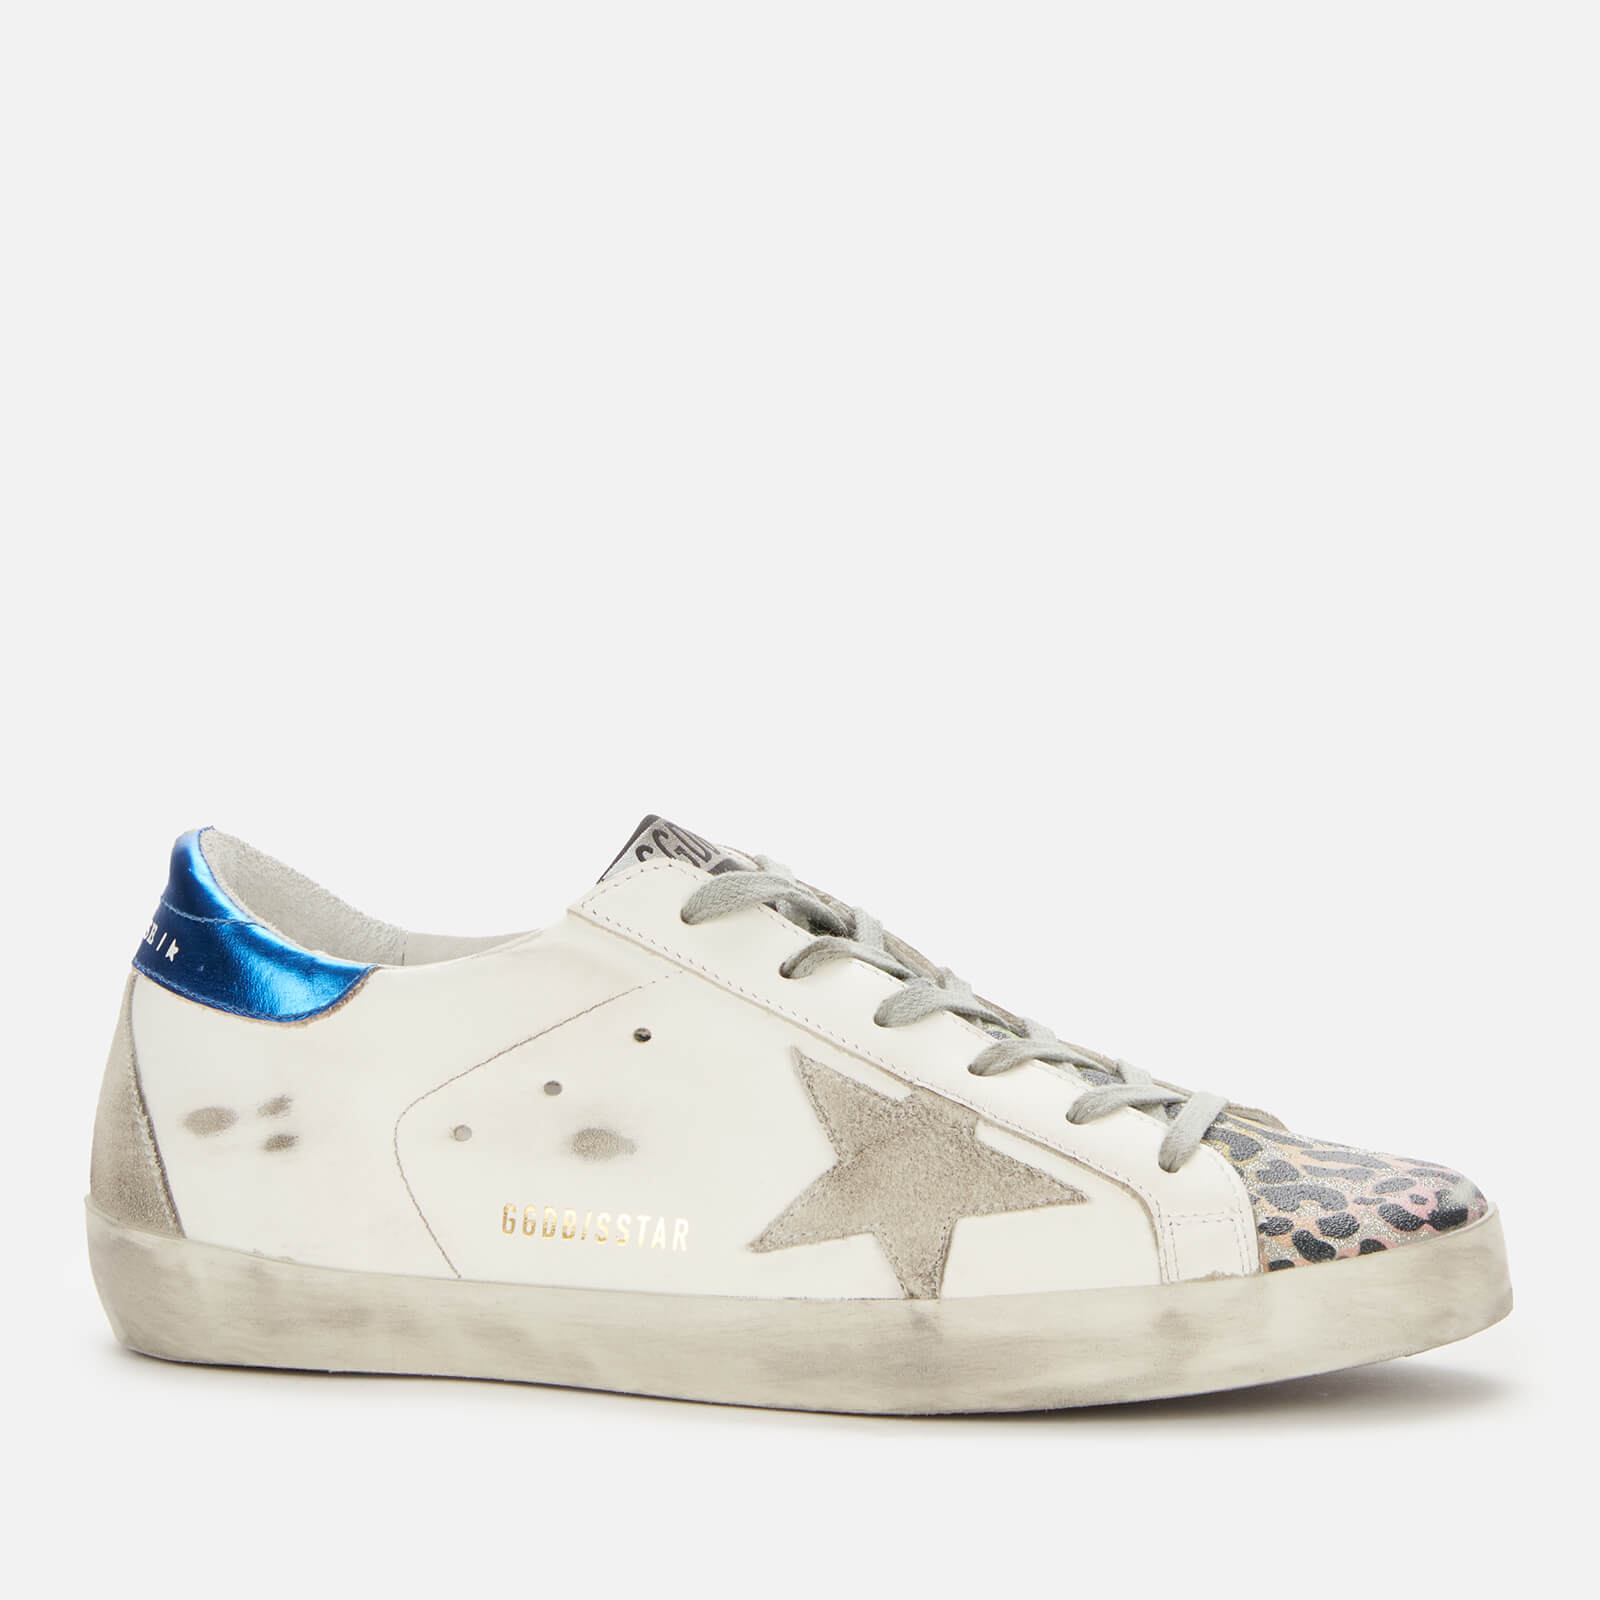 Golden Goose Deluxe Brand Women's Superstar Leather Trainers - White/Silver/Multi Leopard - UK 7